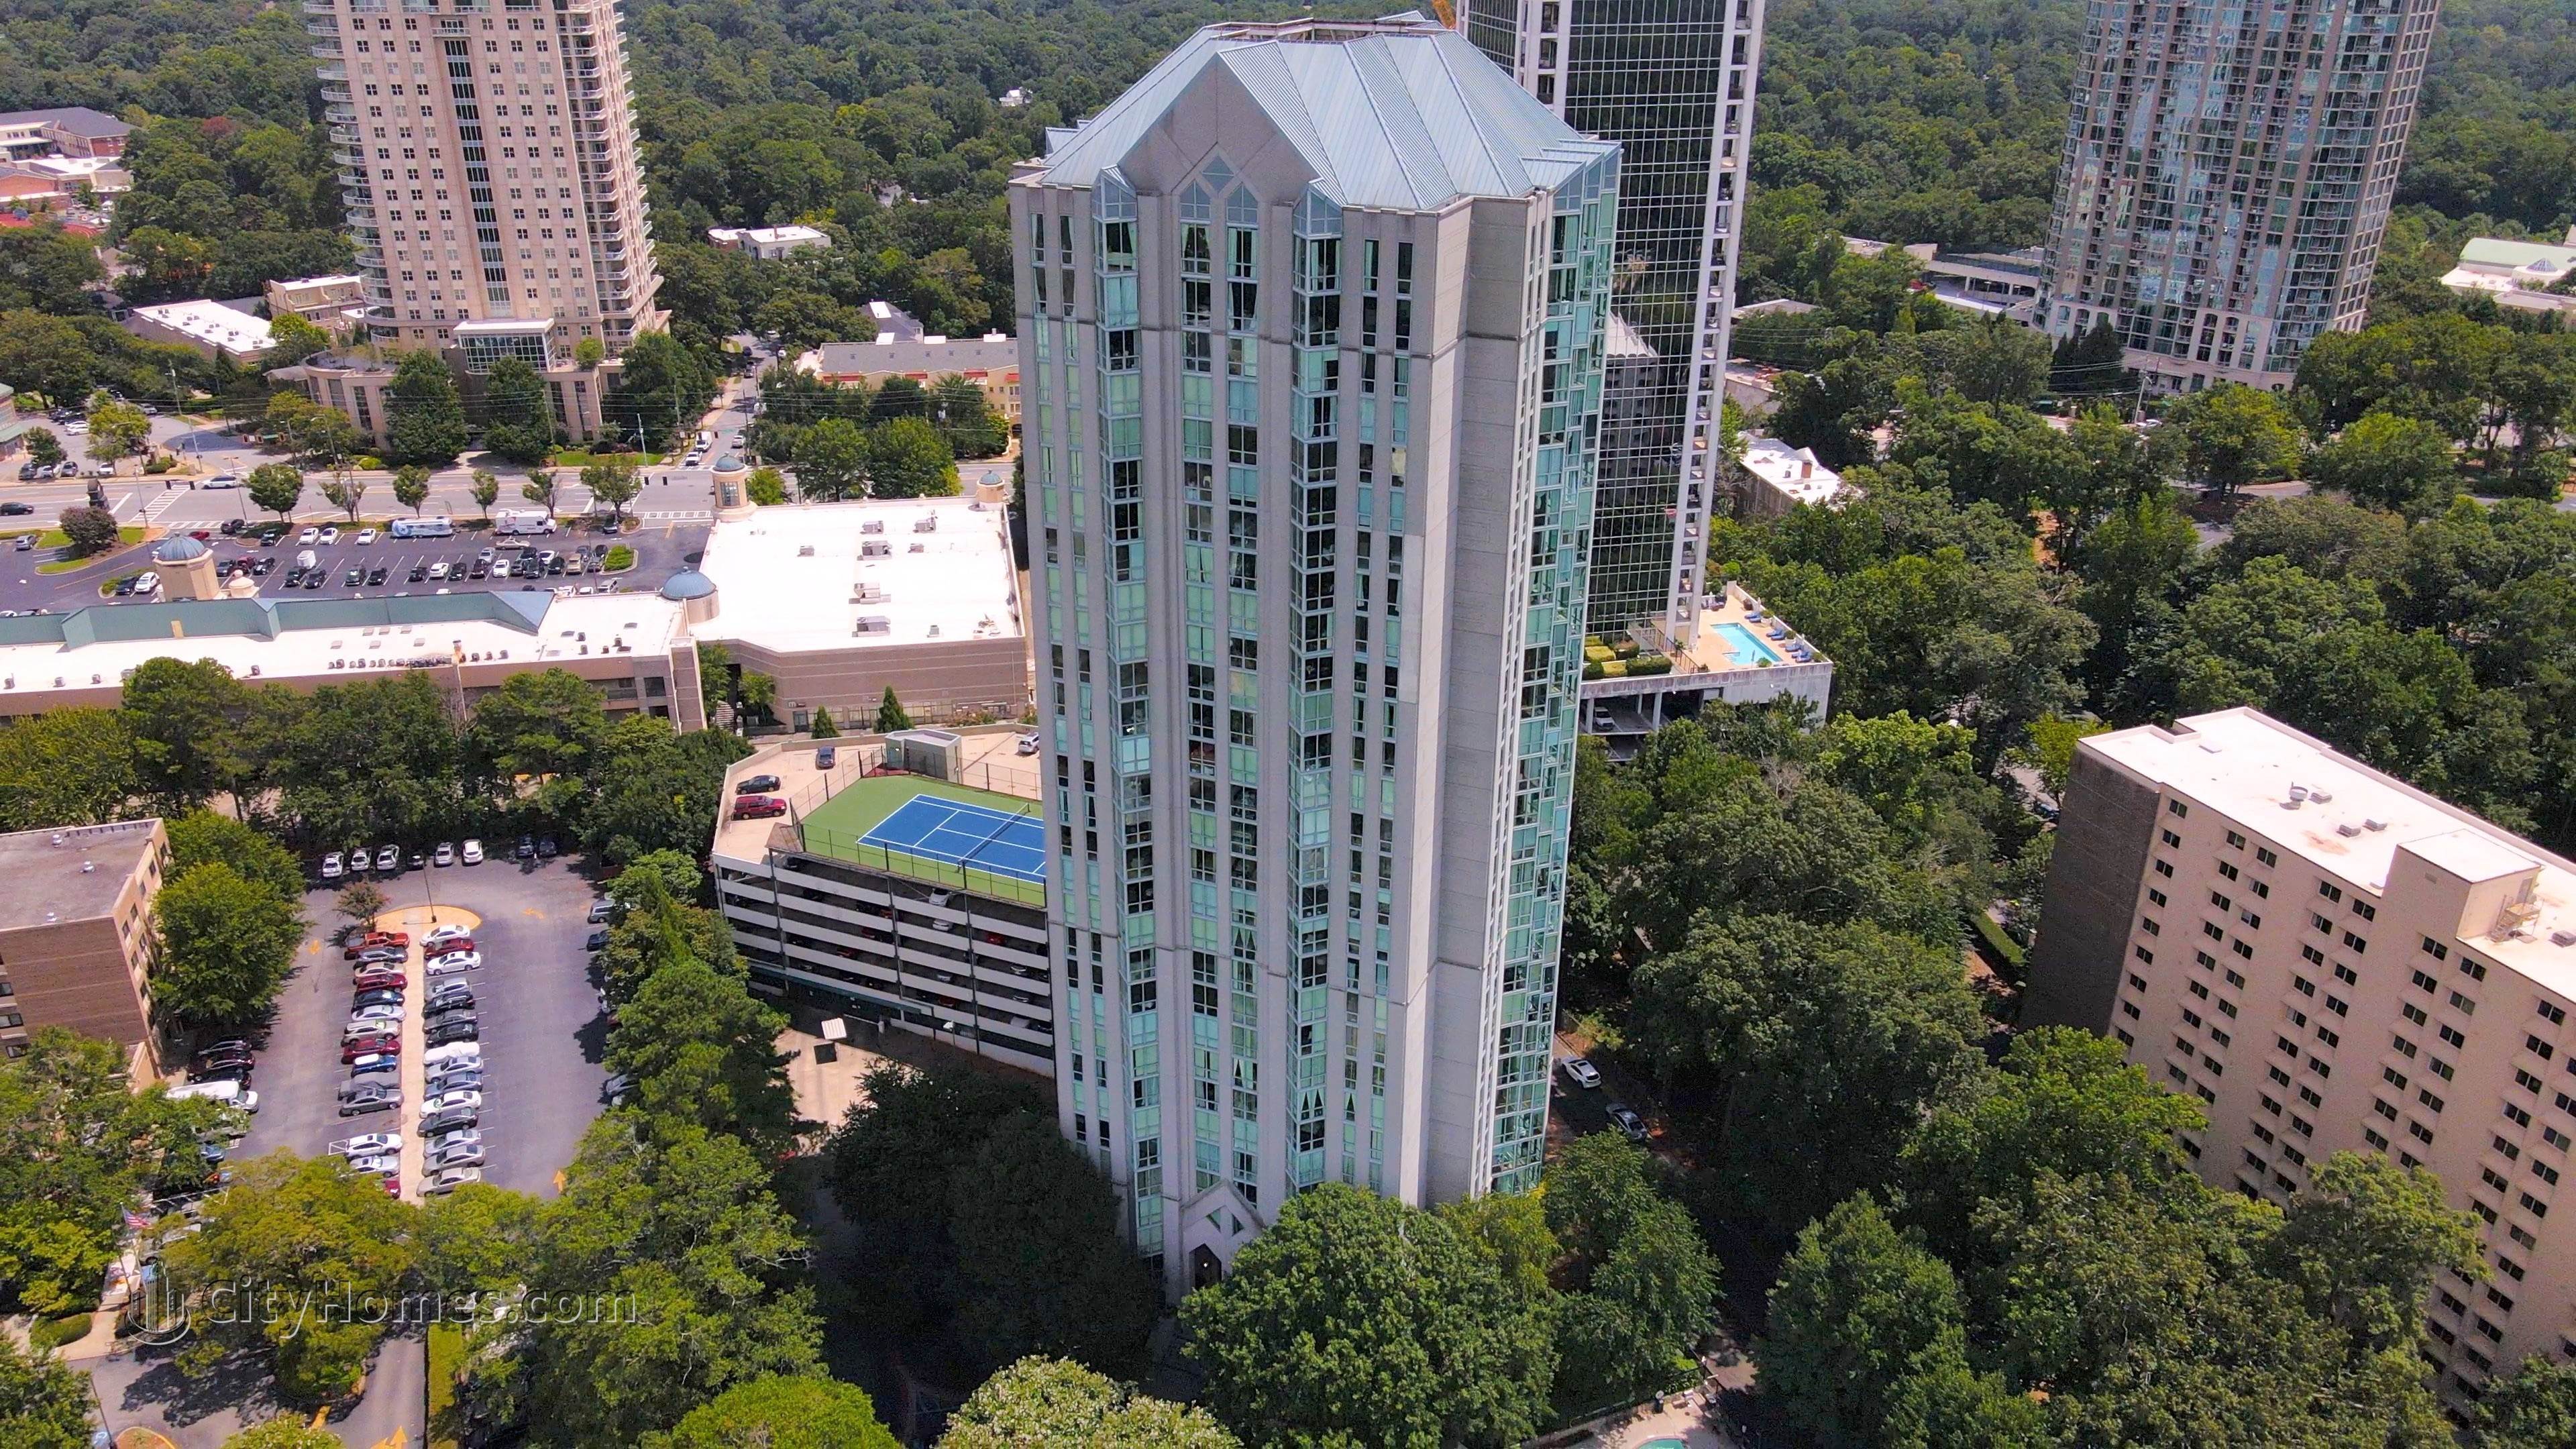 4. The Concorde building at 2870 Pharr Court S NW, Peachtree Heights West, Atlanta, GA 30305